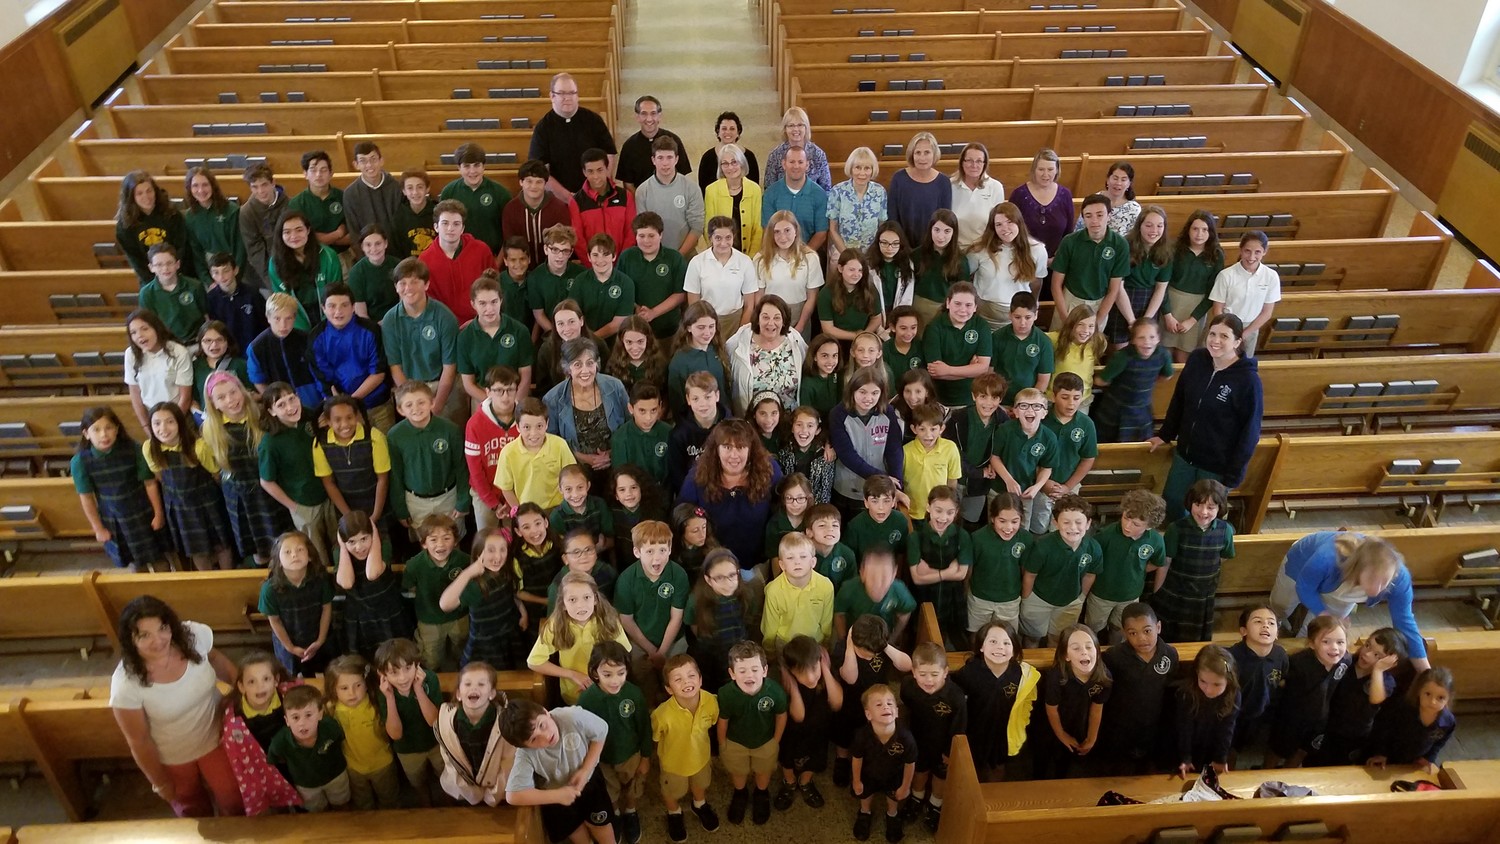 The student body of St. Pius X Regional Academy gathers for a group photo during the School Thanksgiving Mass on June 10. After 55 years of service, the Westerly school closed this year.